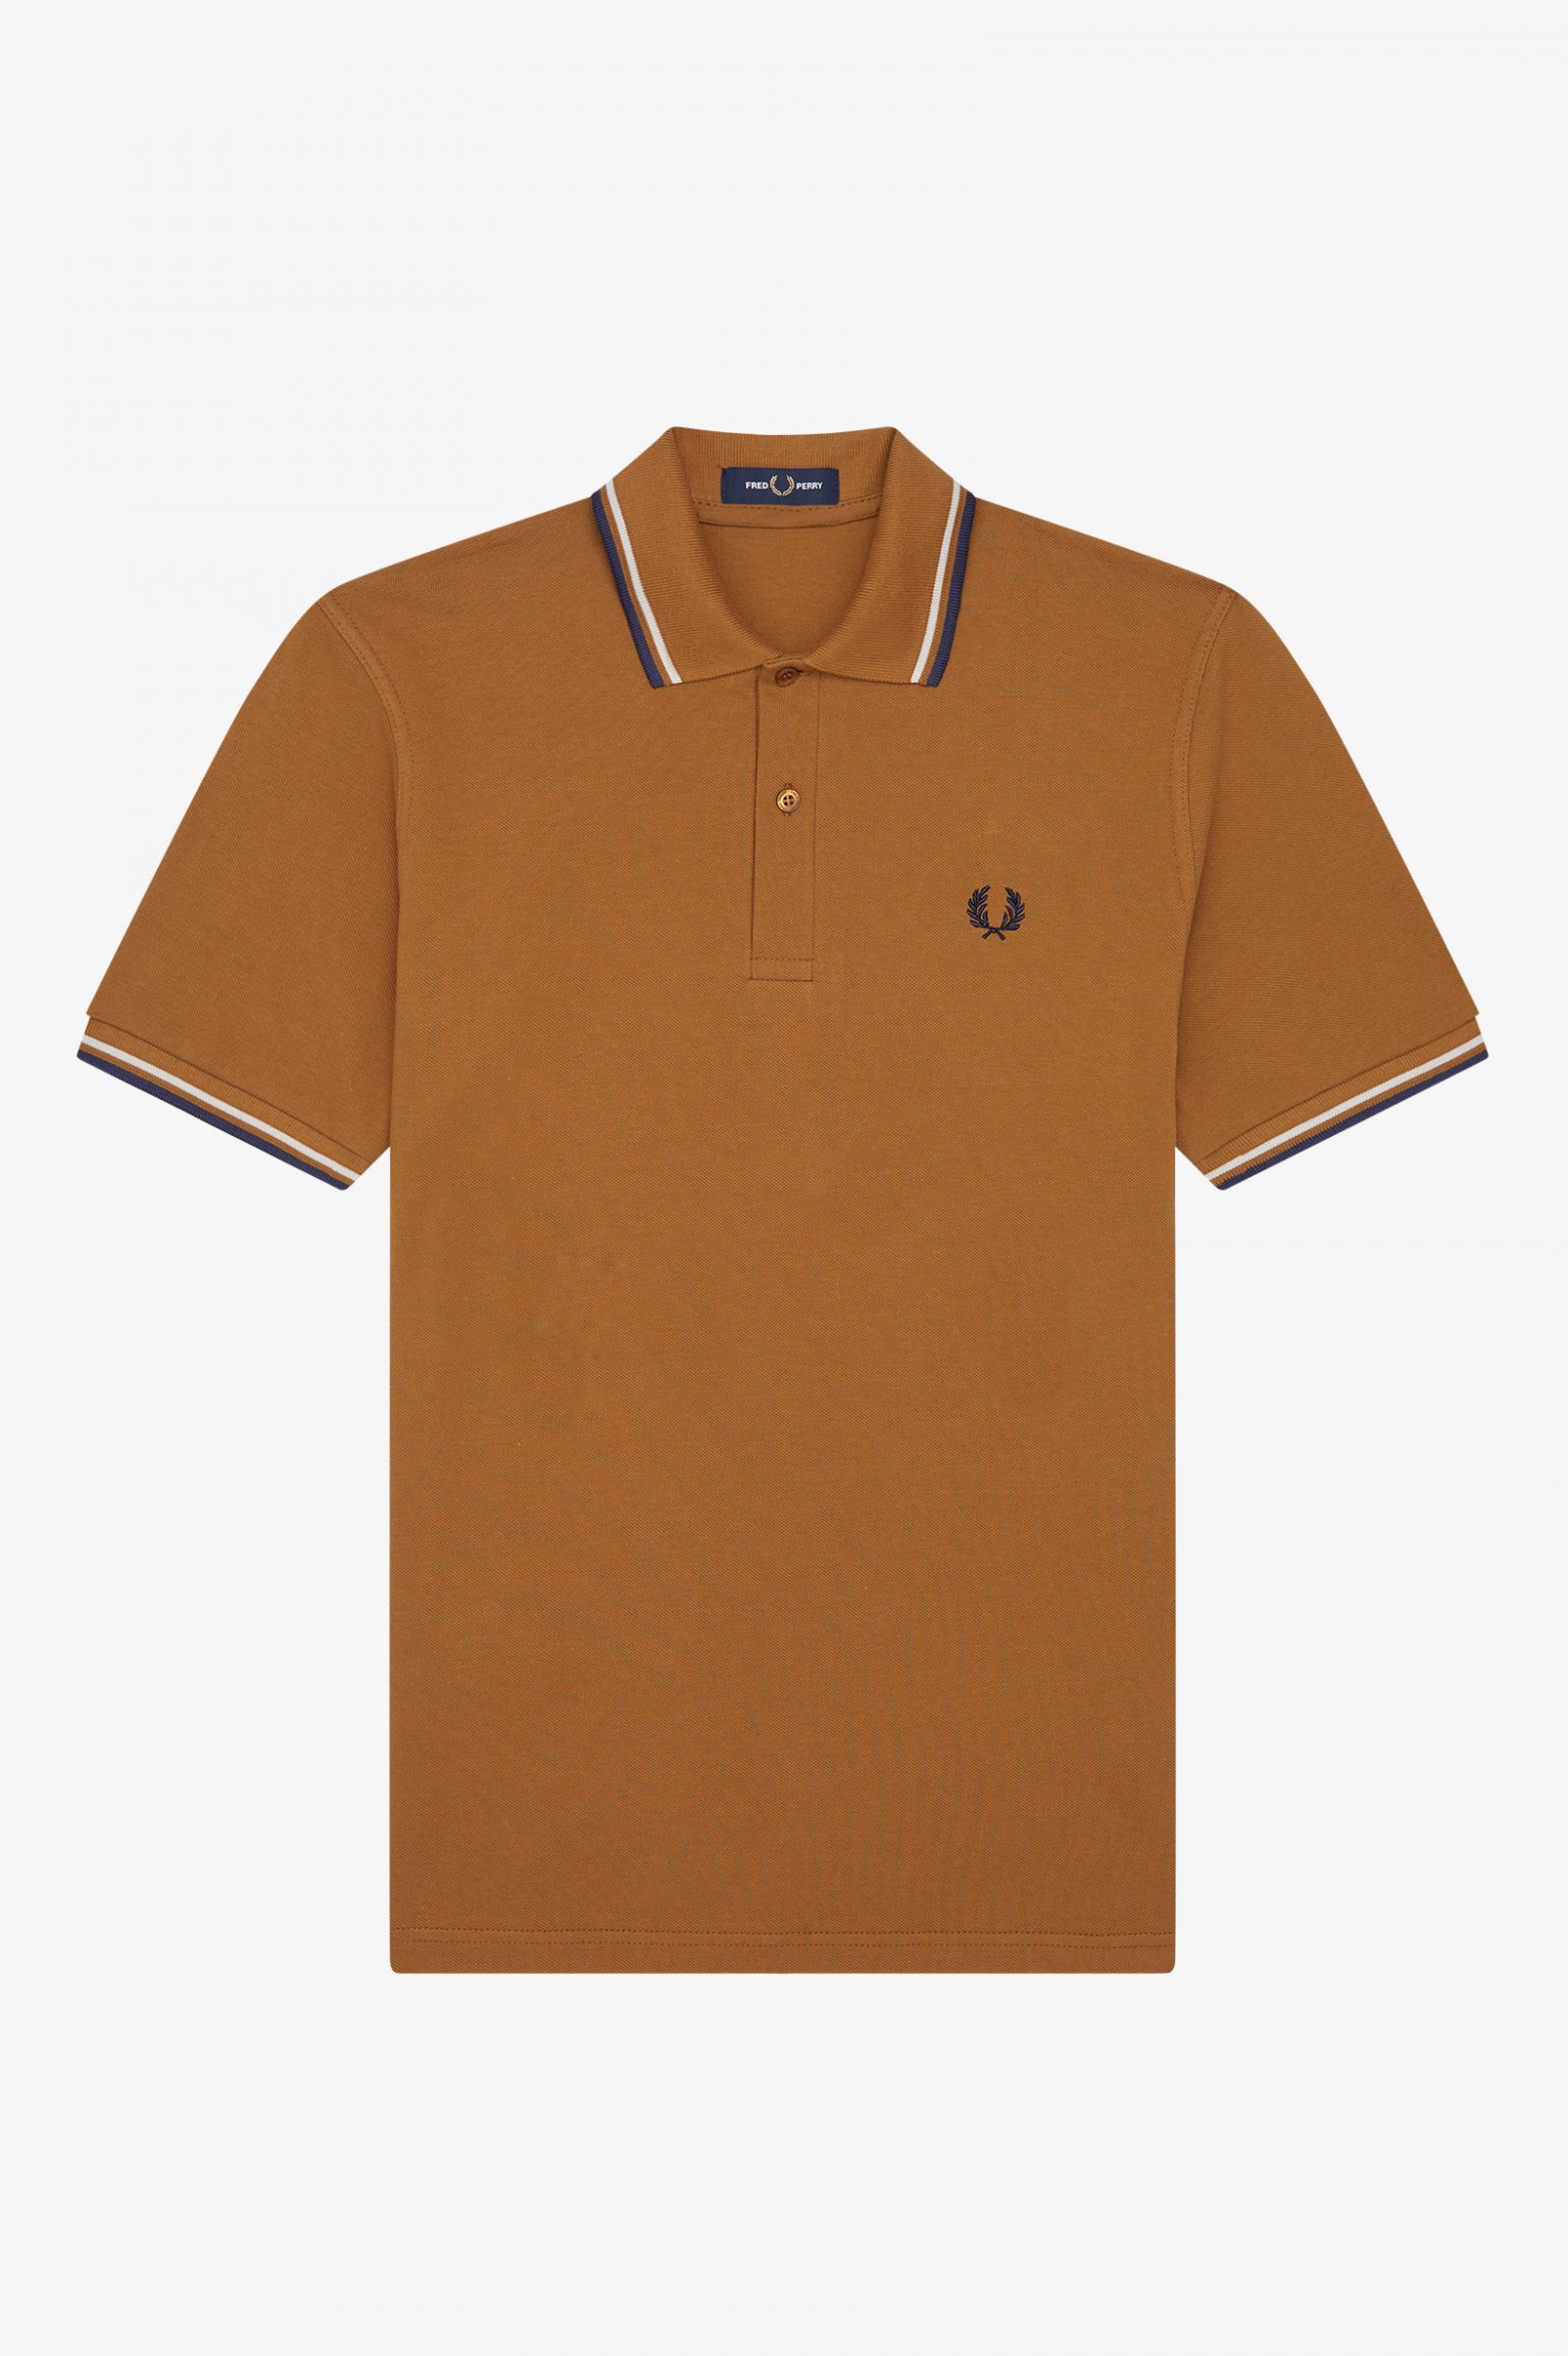 Fred Perry Men/'s Twin Tipped Deep Carbon Polo Shirt